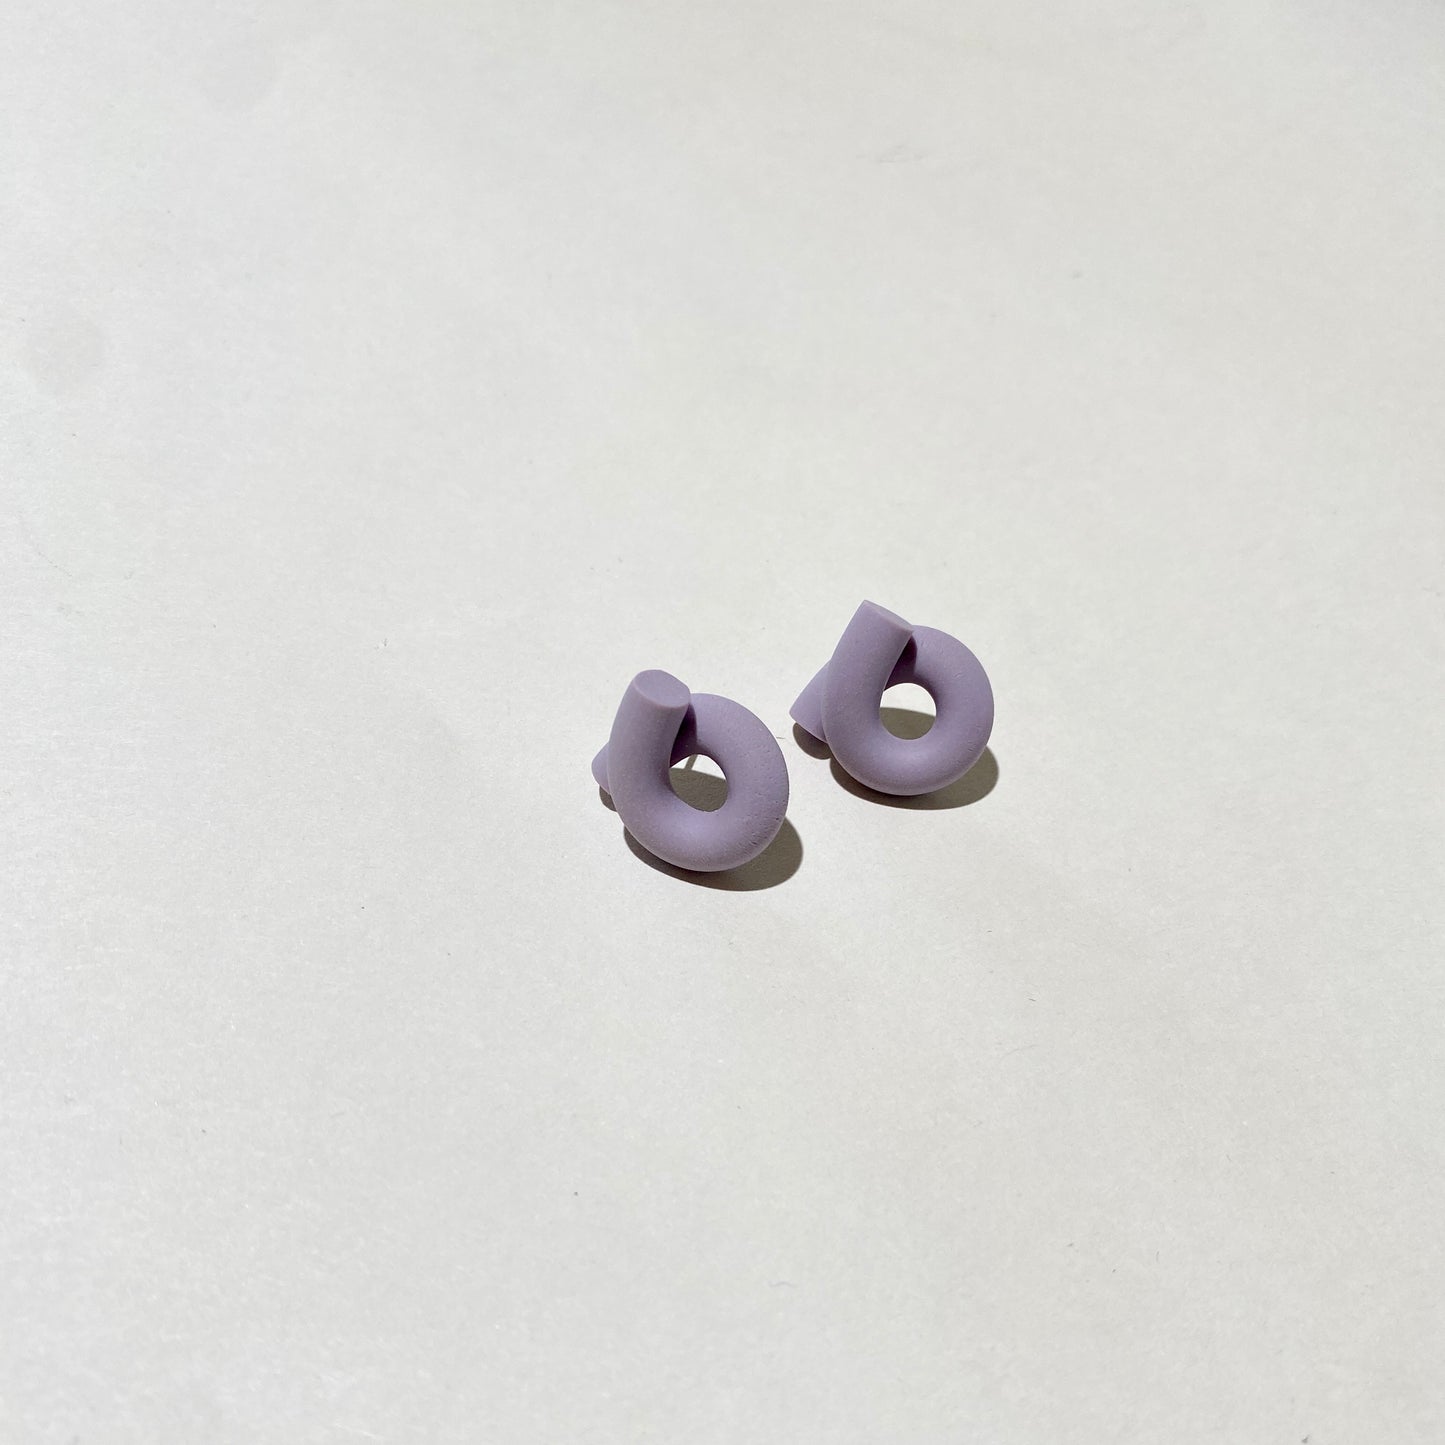 Loop earring seconds and samples